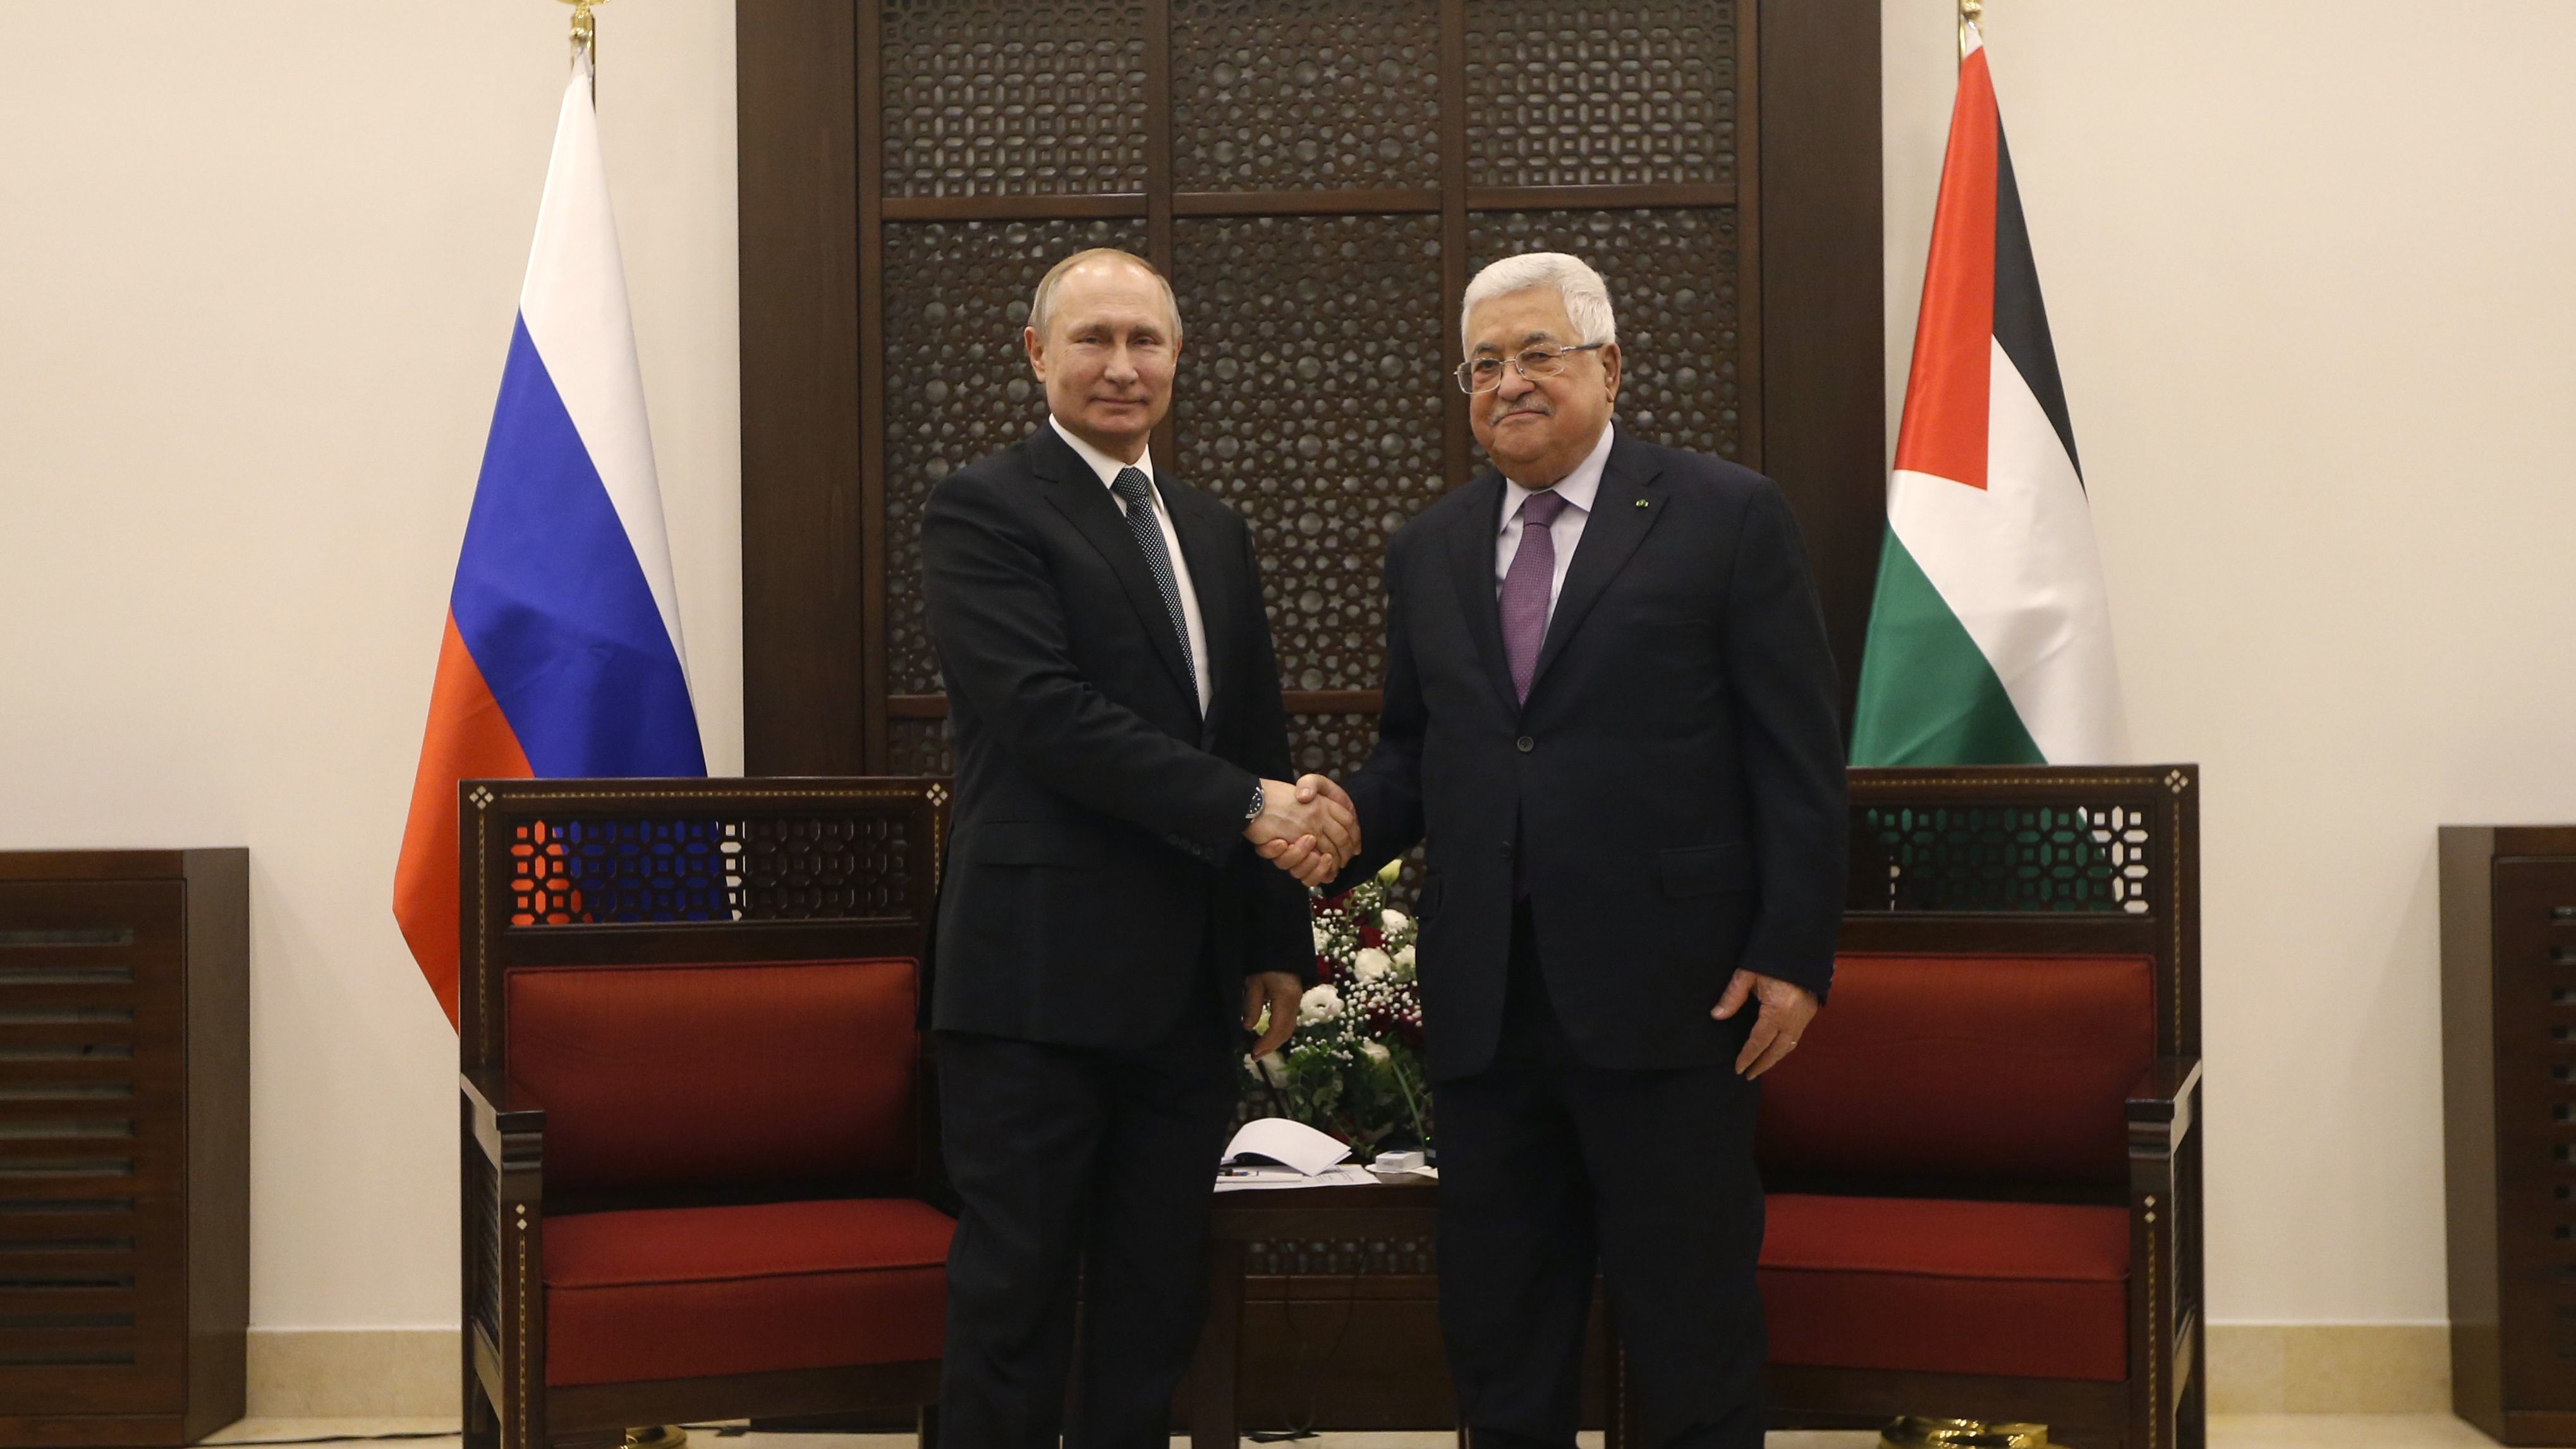 Putin Visit to Bethlehem, Planned Abbas Trip to Moscow, Buoy Palestinian Hopes (with VIDEO)